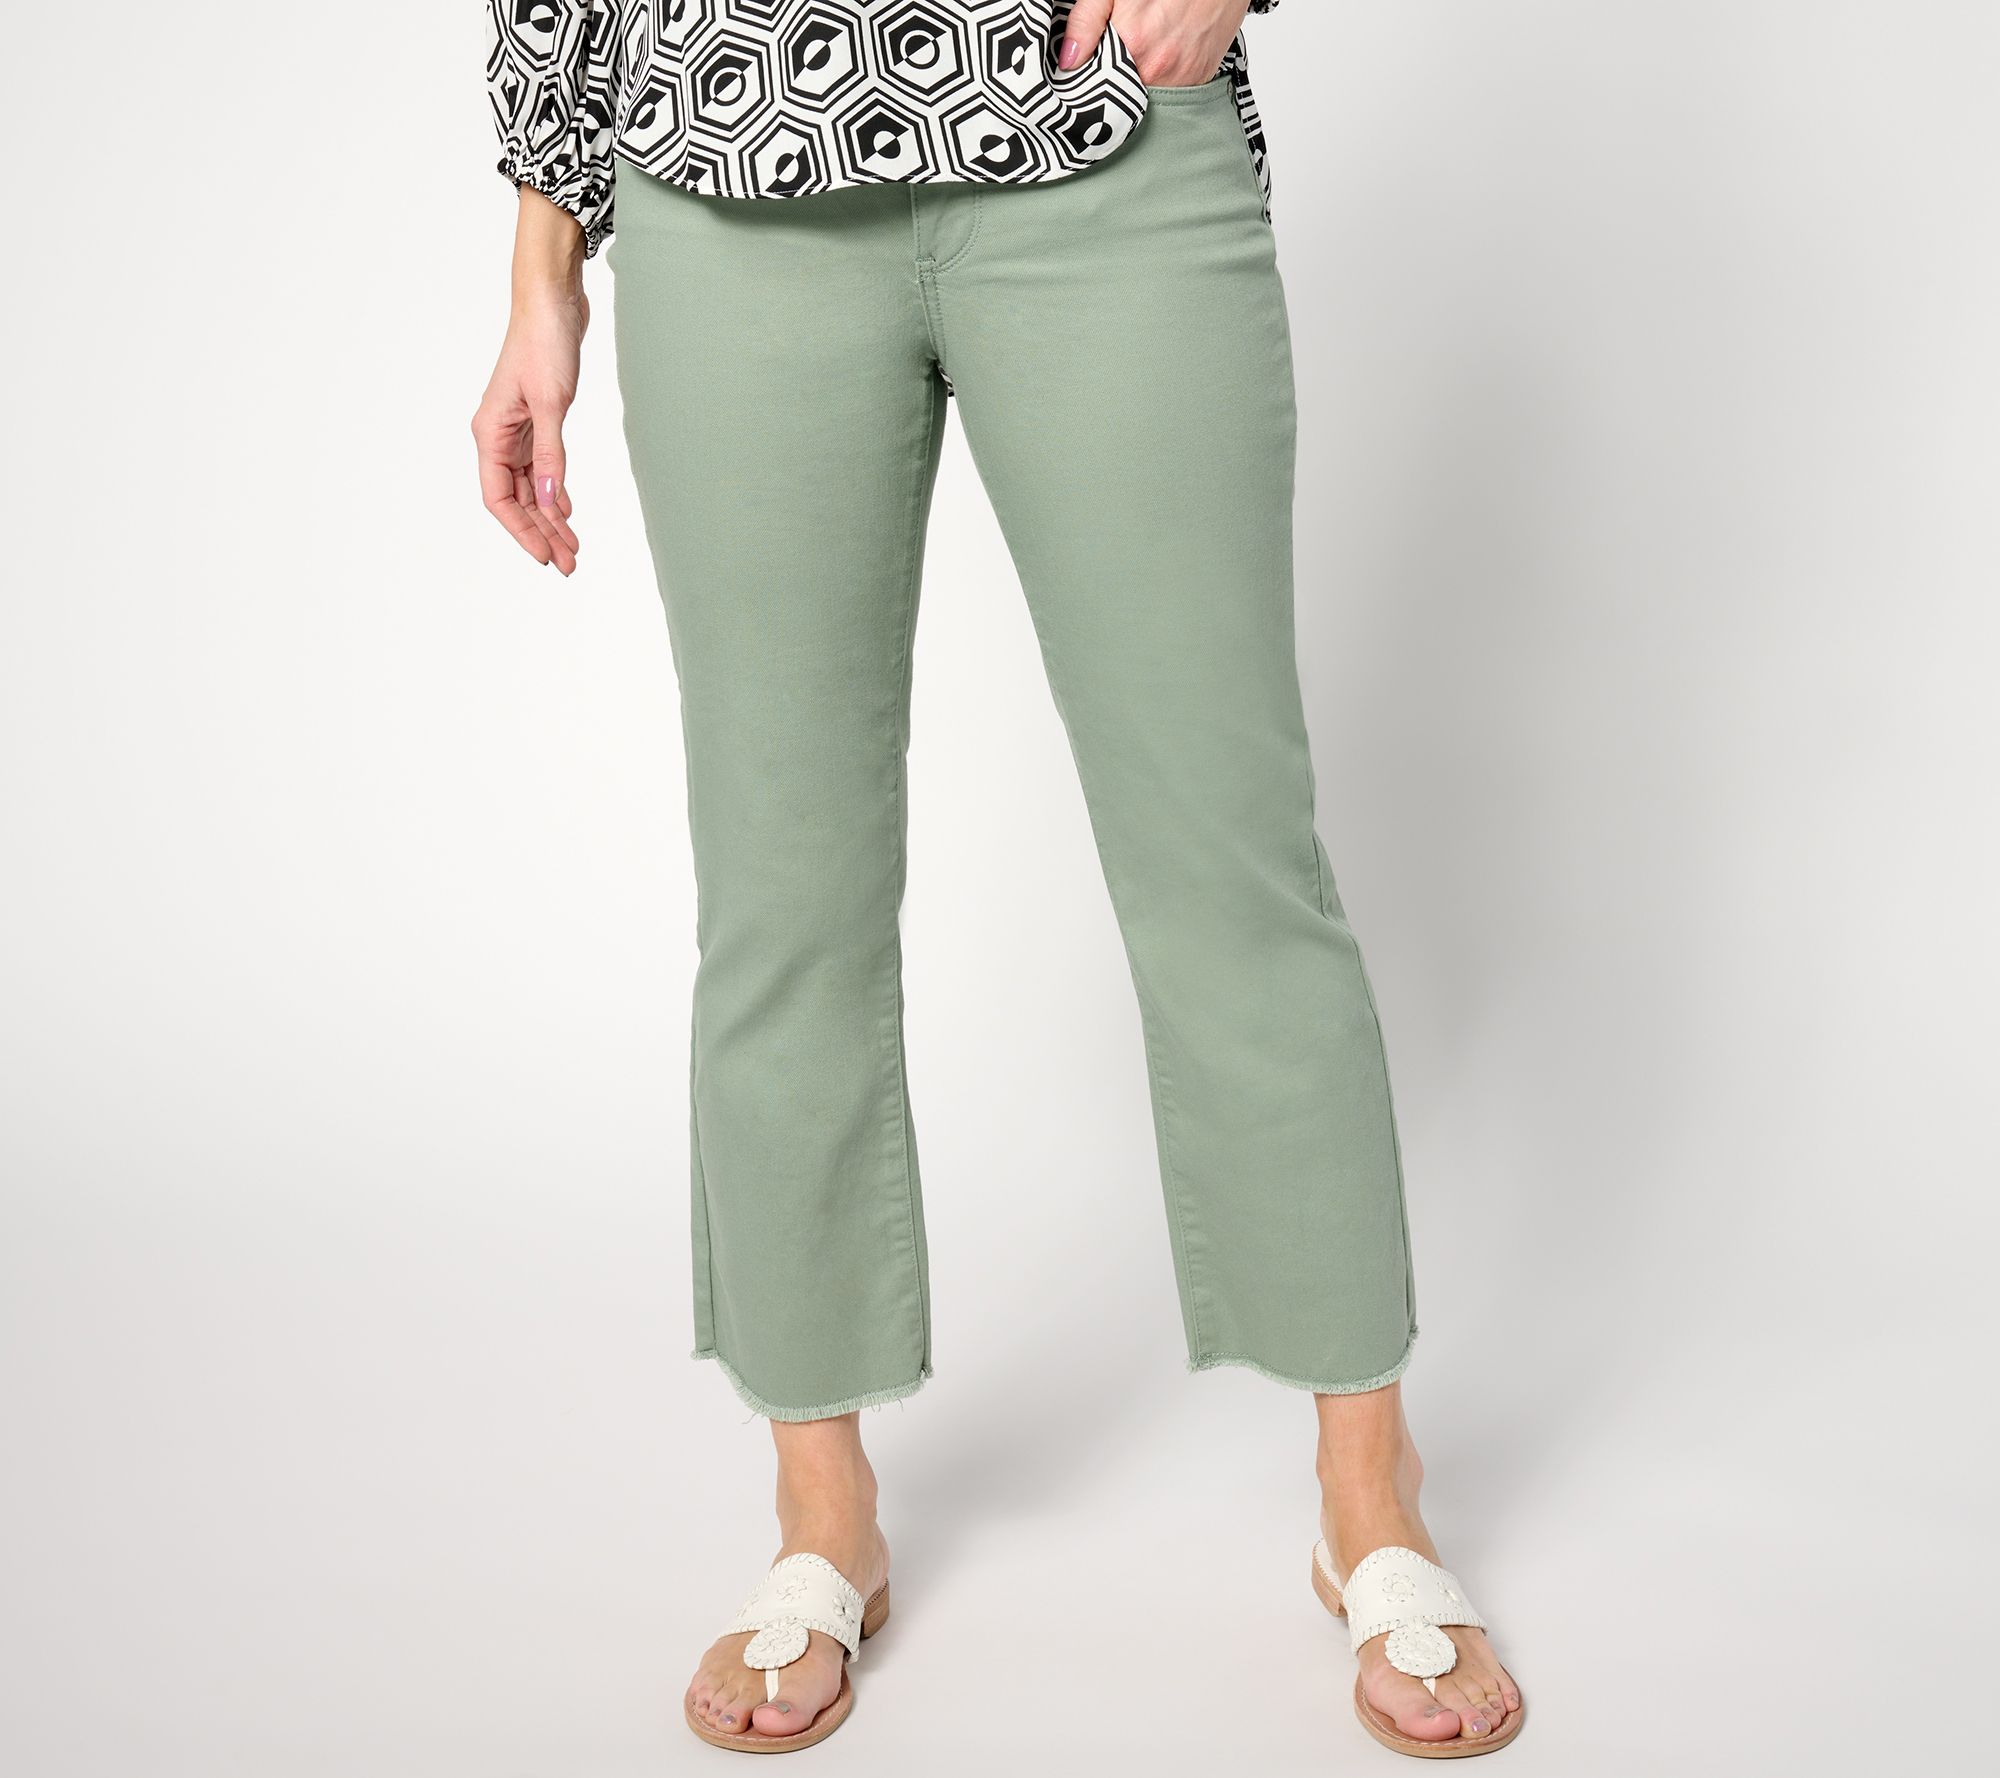 Women With Control Petite Knit Pull On Capri Pant